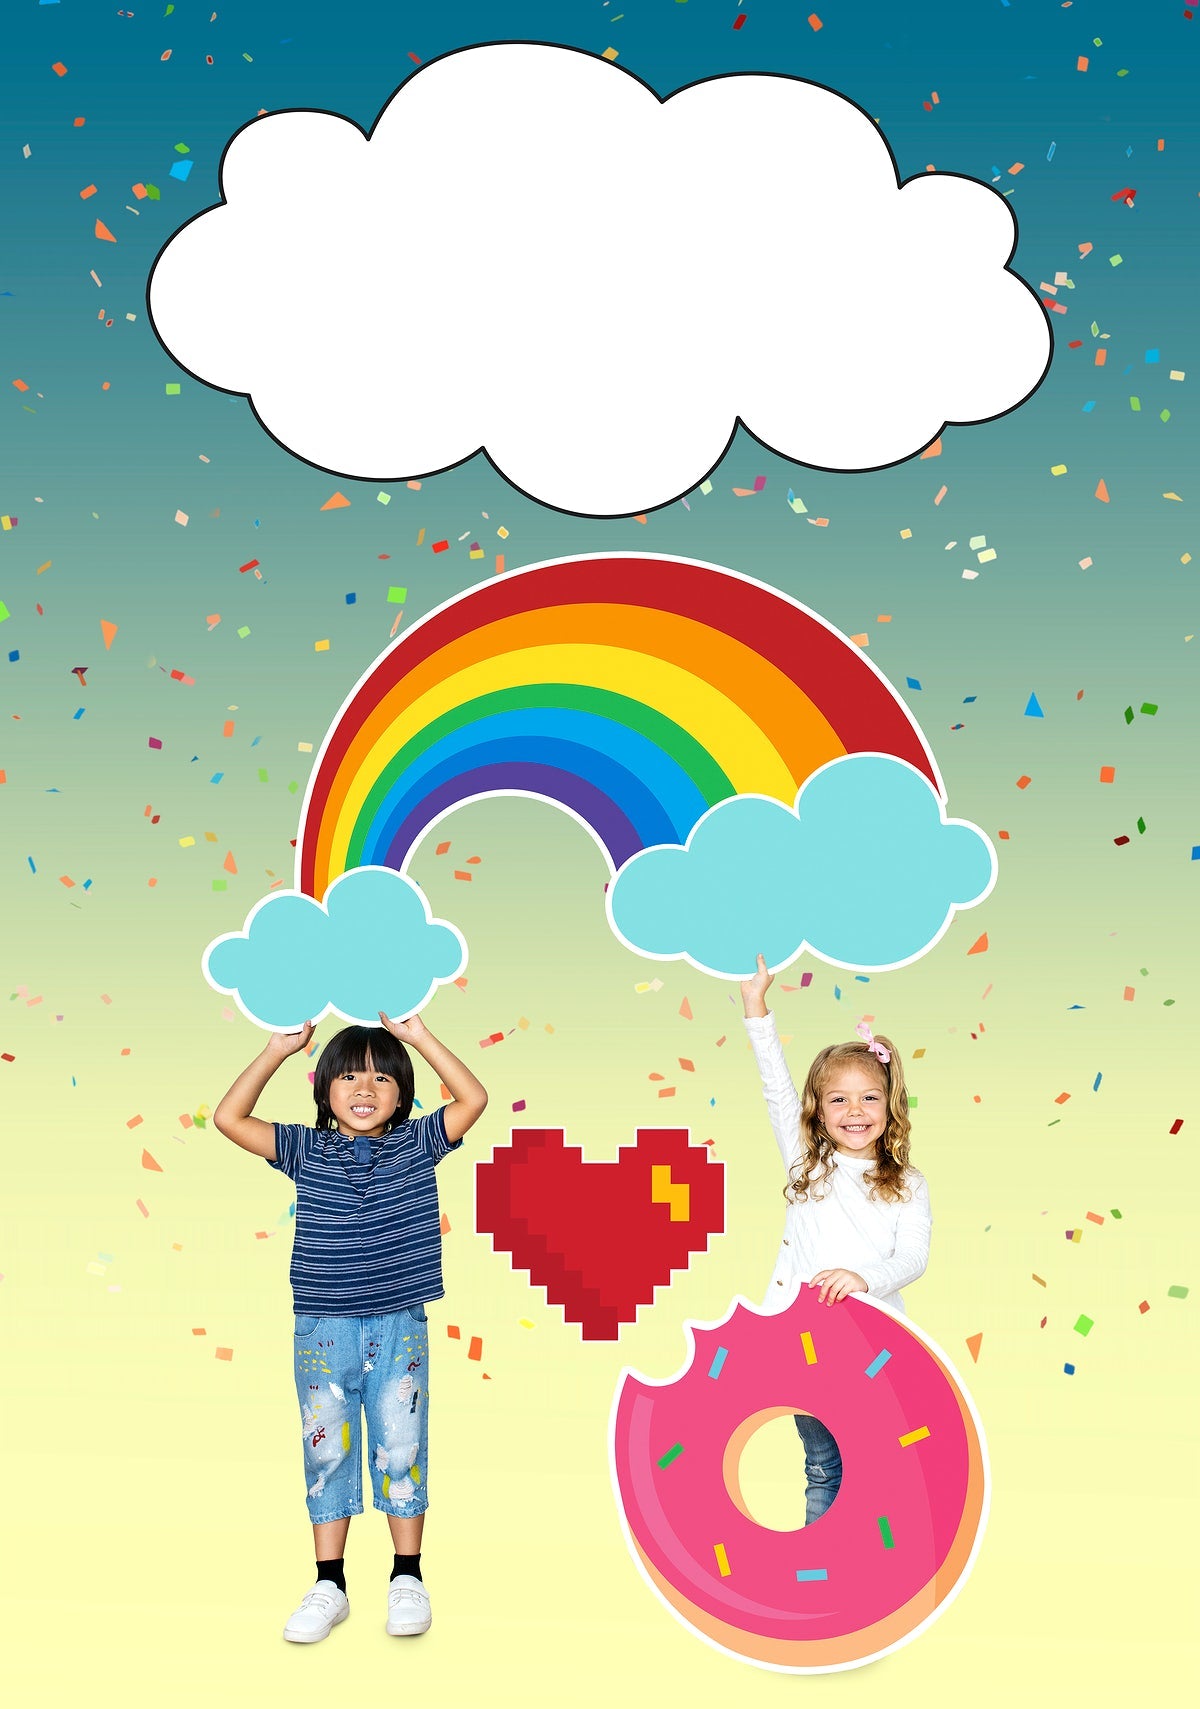 Free Cheerful Kids With A Rainbow And A Donut Icon